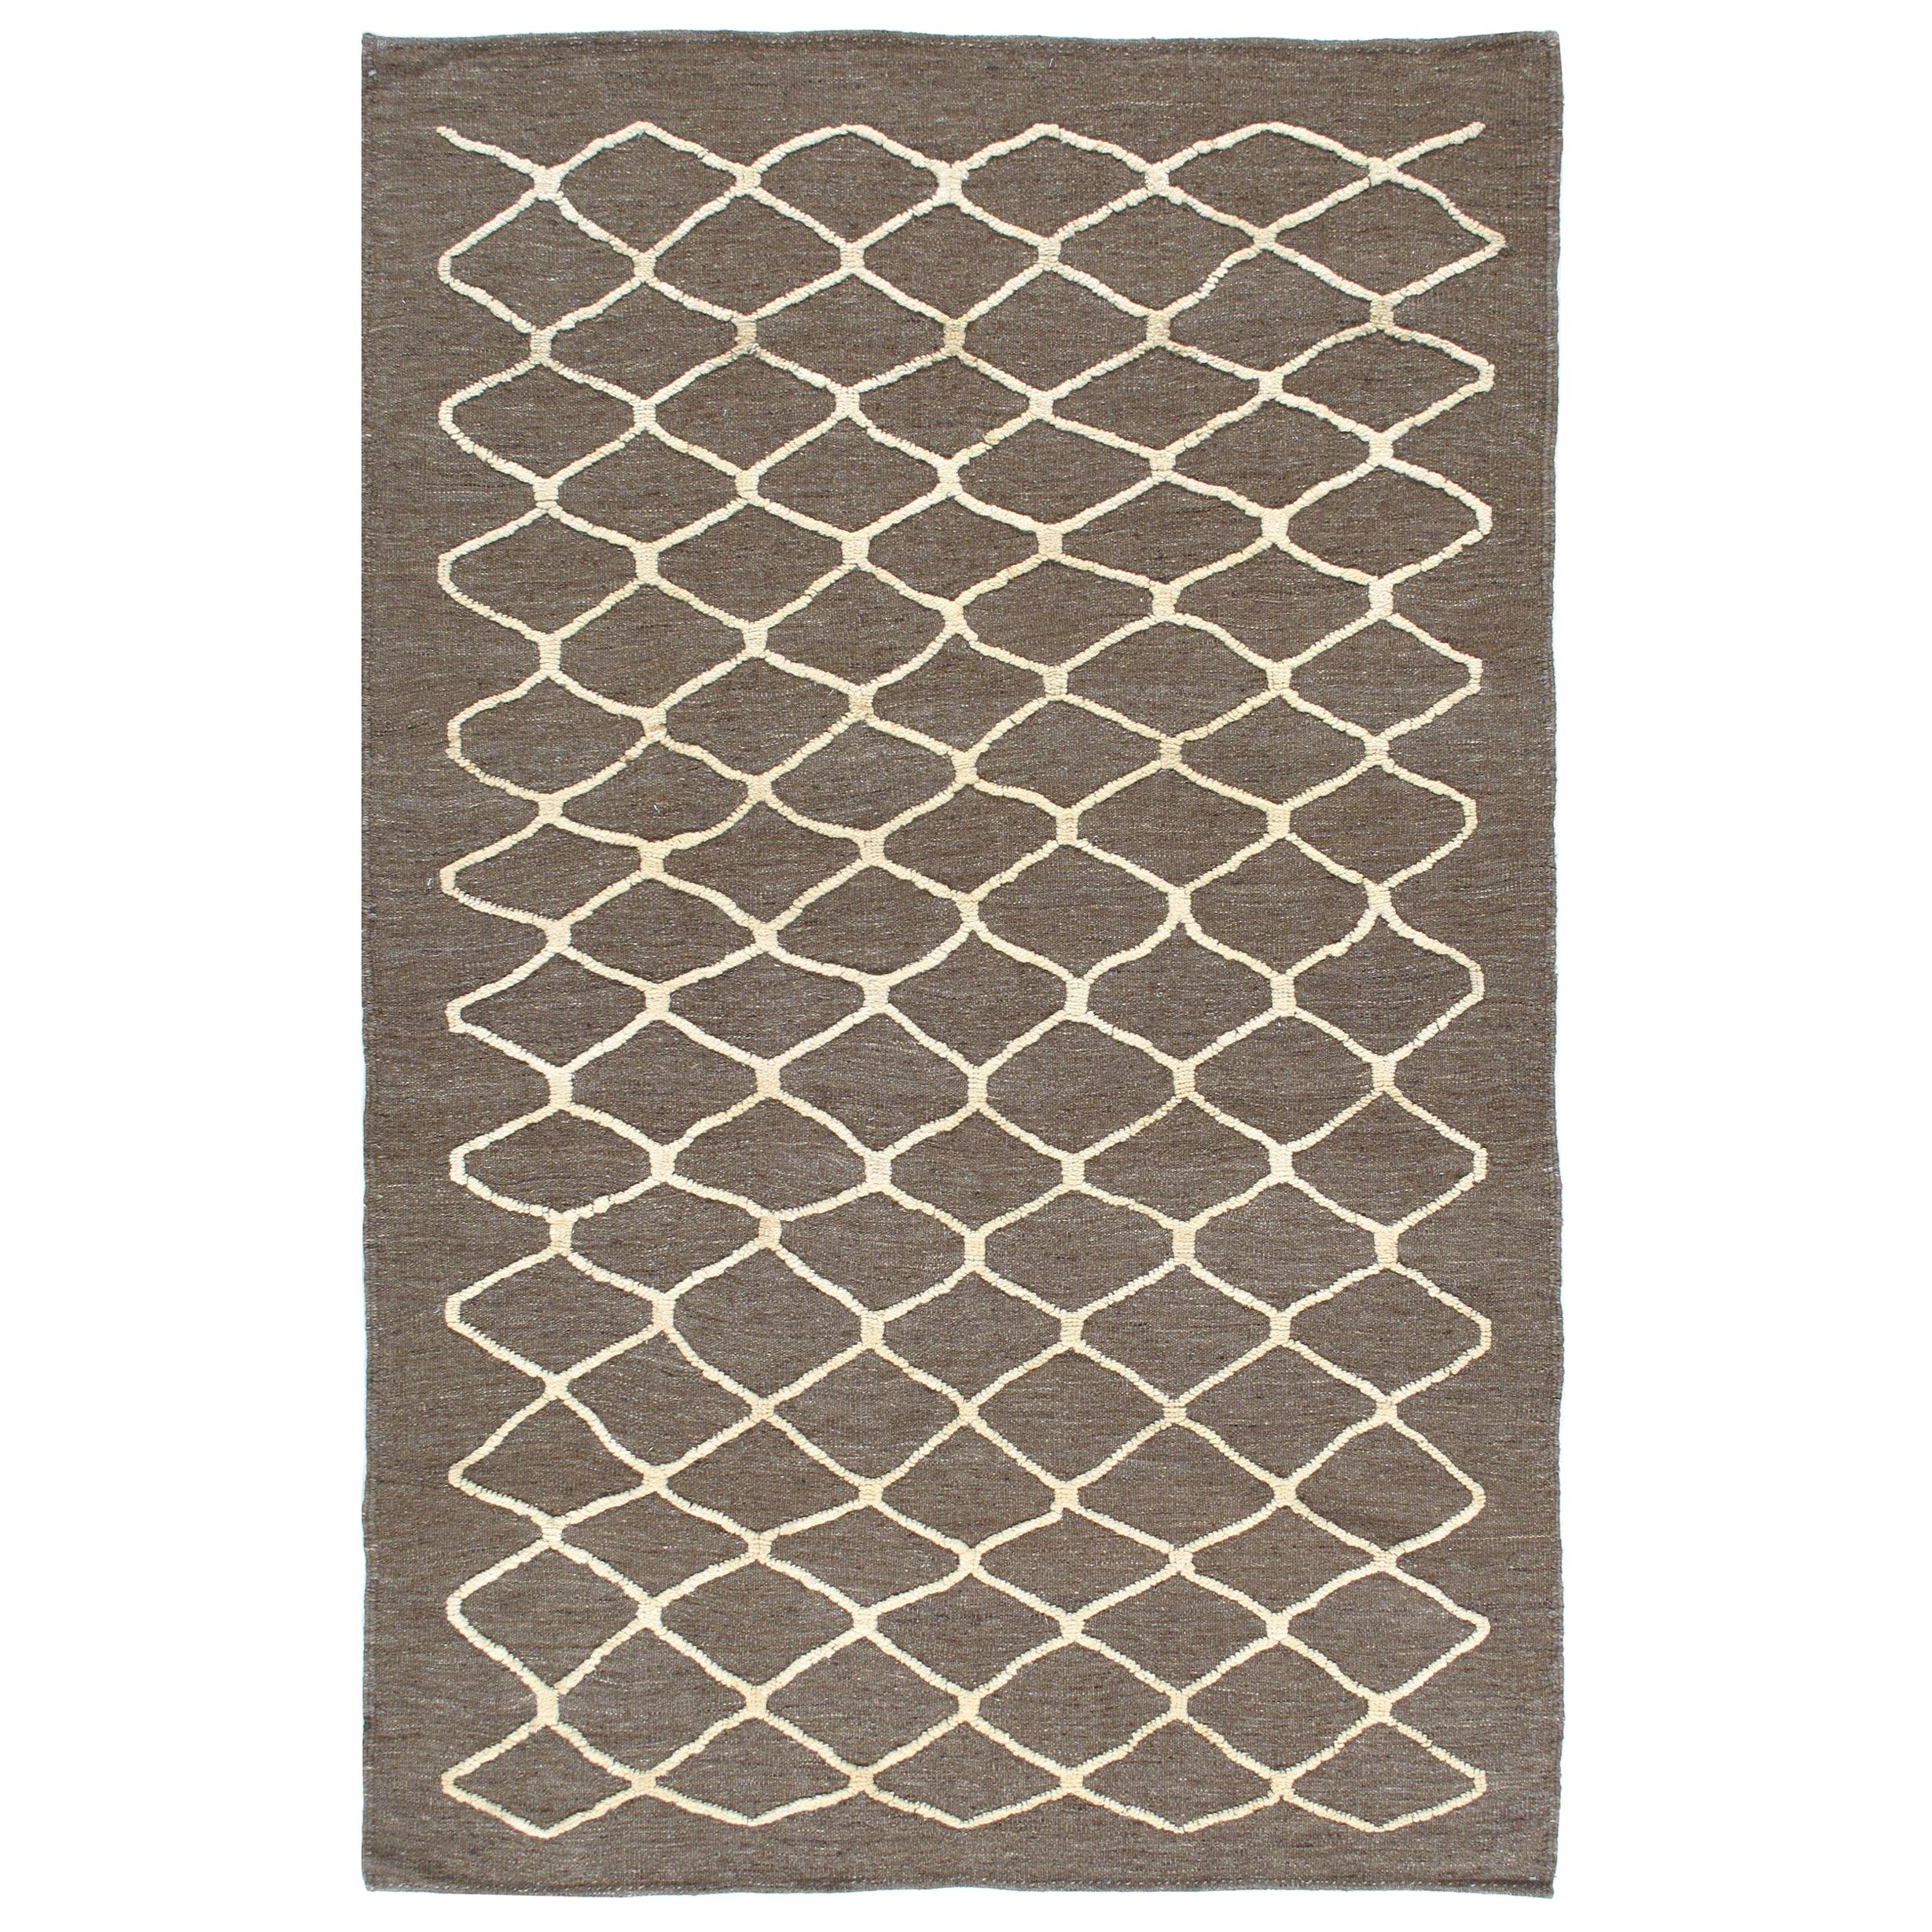 Midcentury Style Tribal Persian Shiraz Flat-Weave Rug For Sale